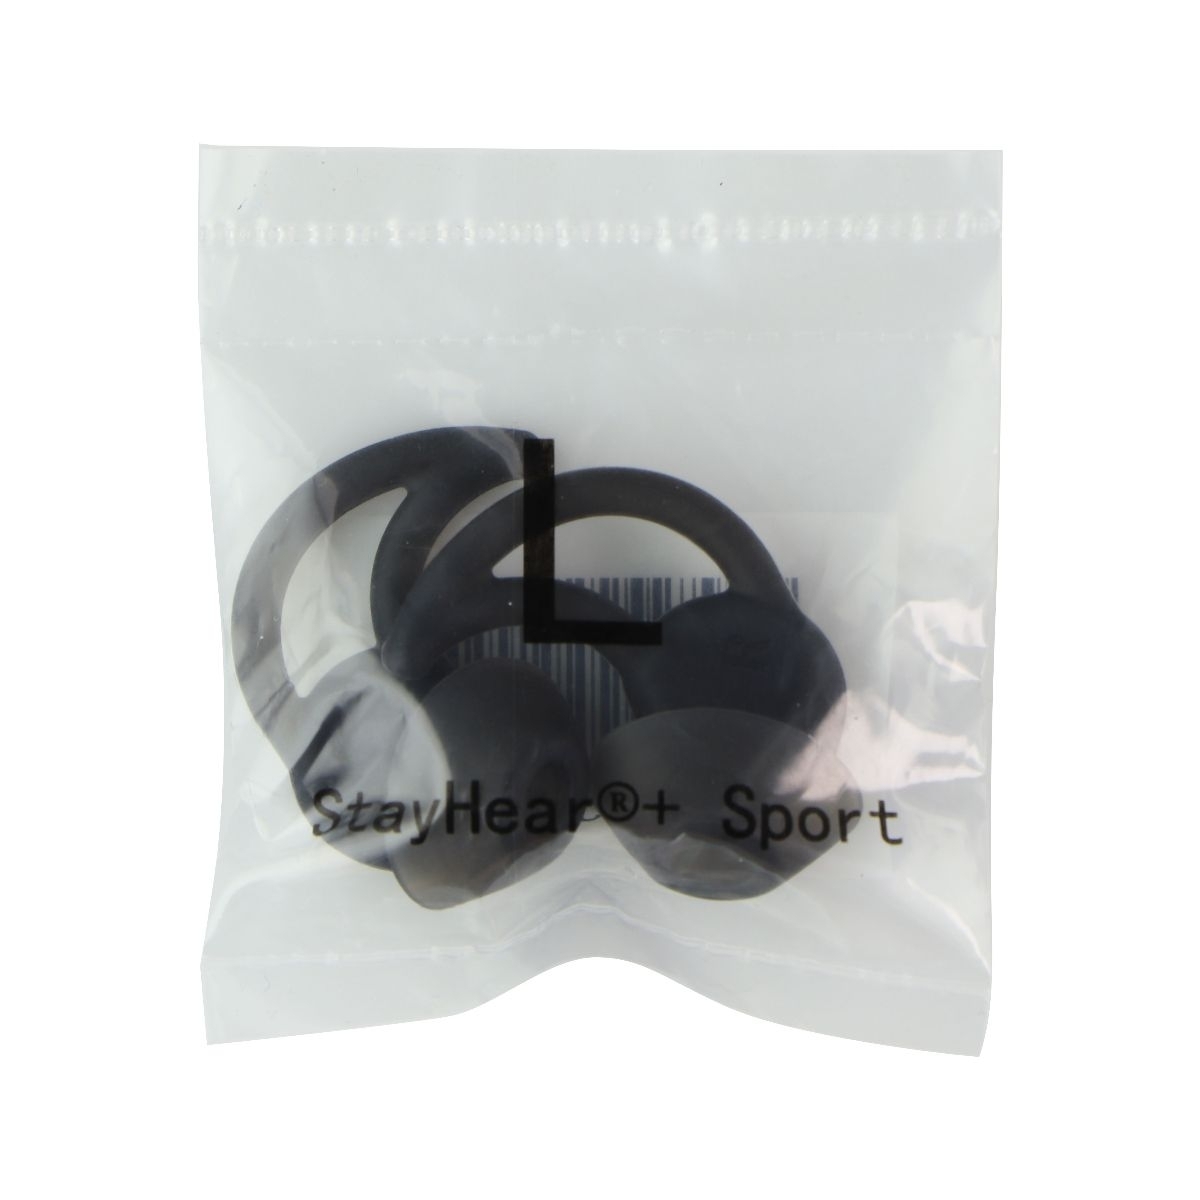 Replacement Silicone Ear Gels For Bose SoundSport - Large - Dark Gray (Refurbished)